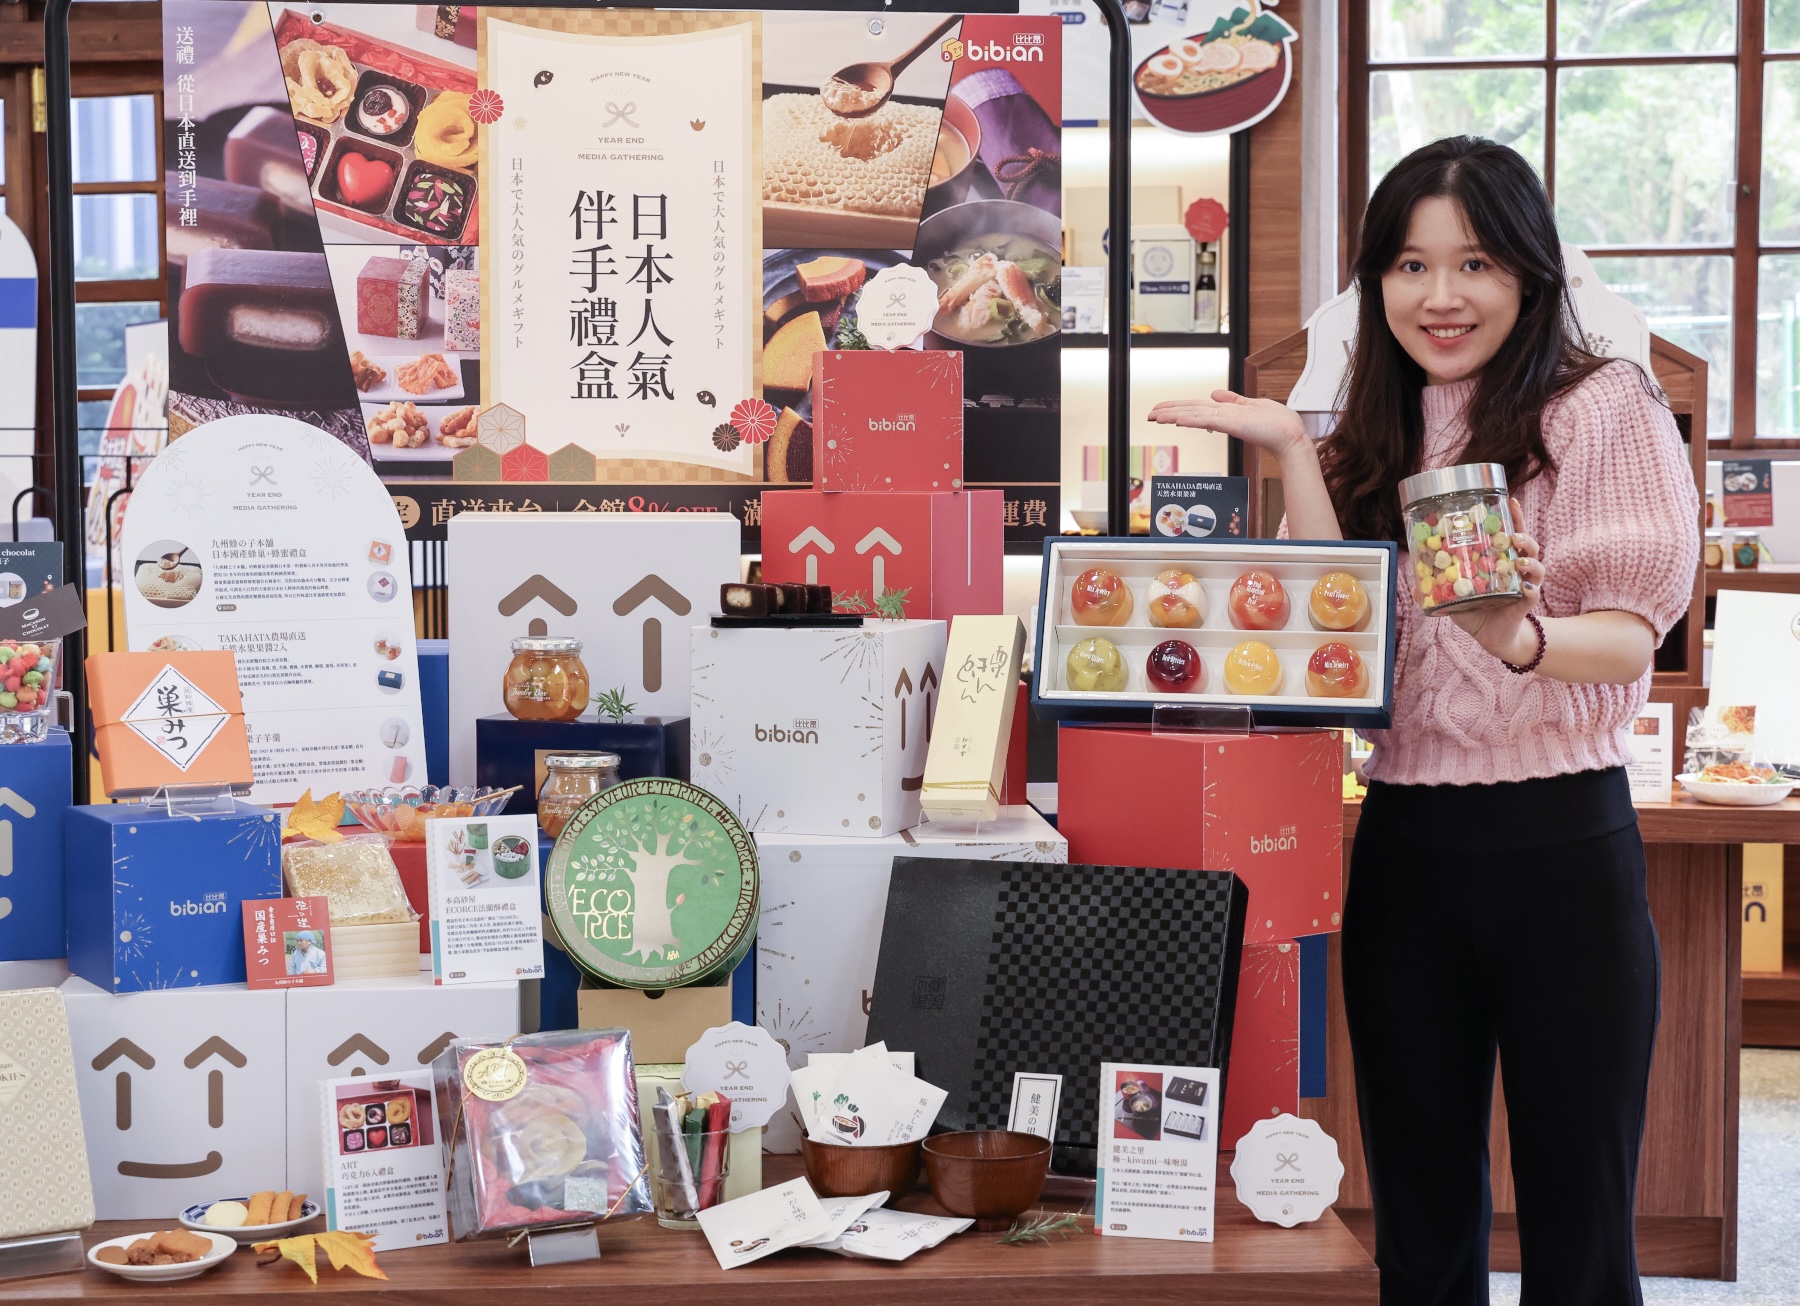 Sales Increase Nearly Three Times since Bibian Started in Taiwan Three Years Ago and It Hits Another Record High This Year